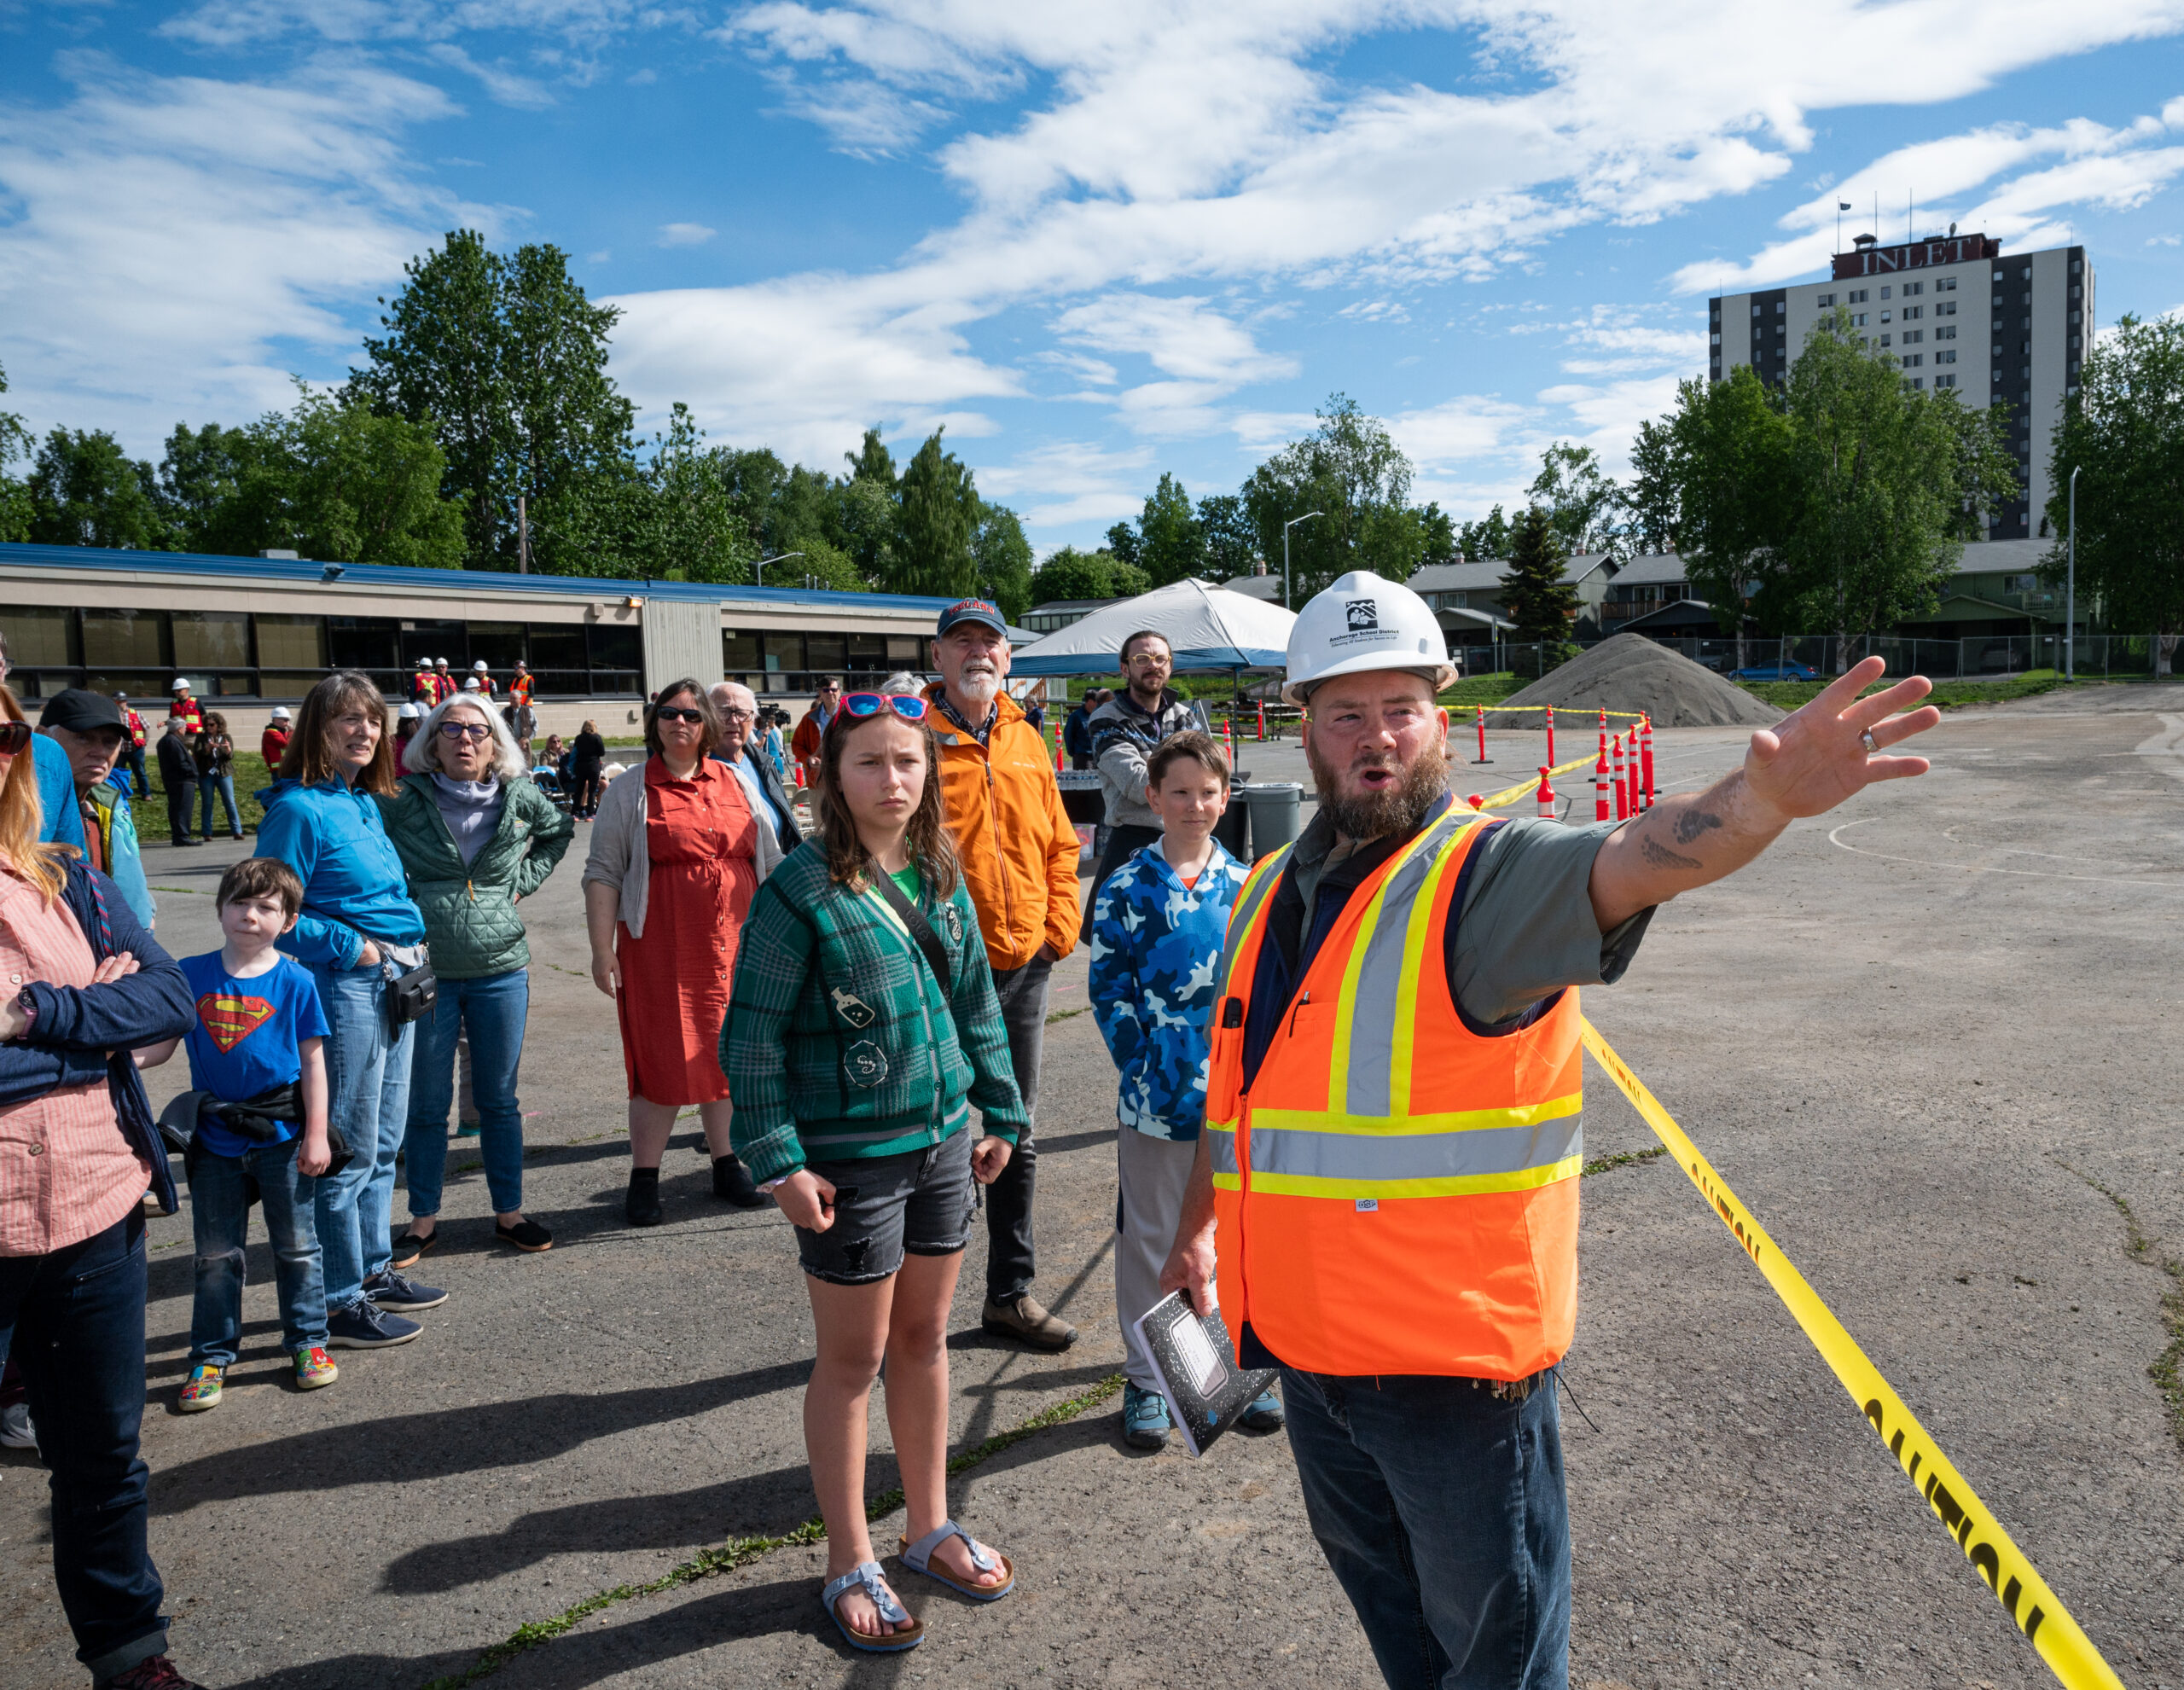 A project manager in an orange safety vest and helmet gives a tour.